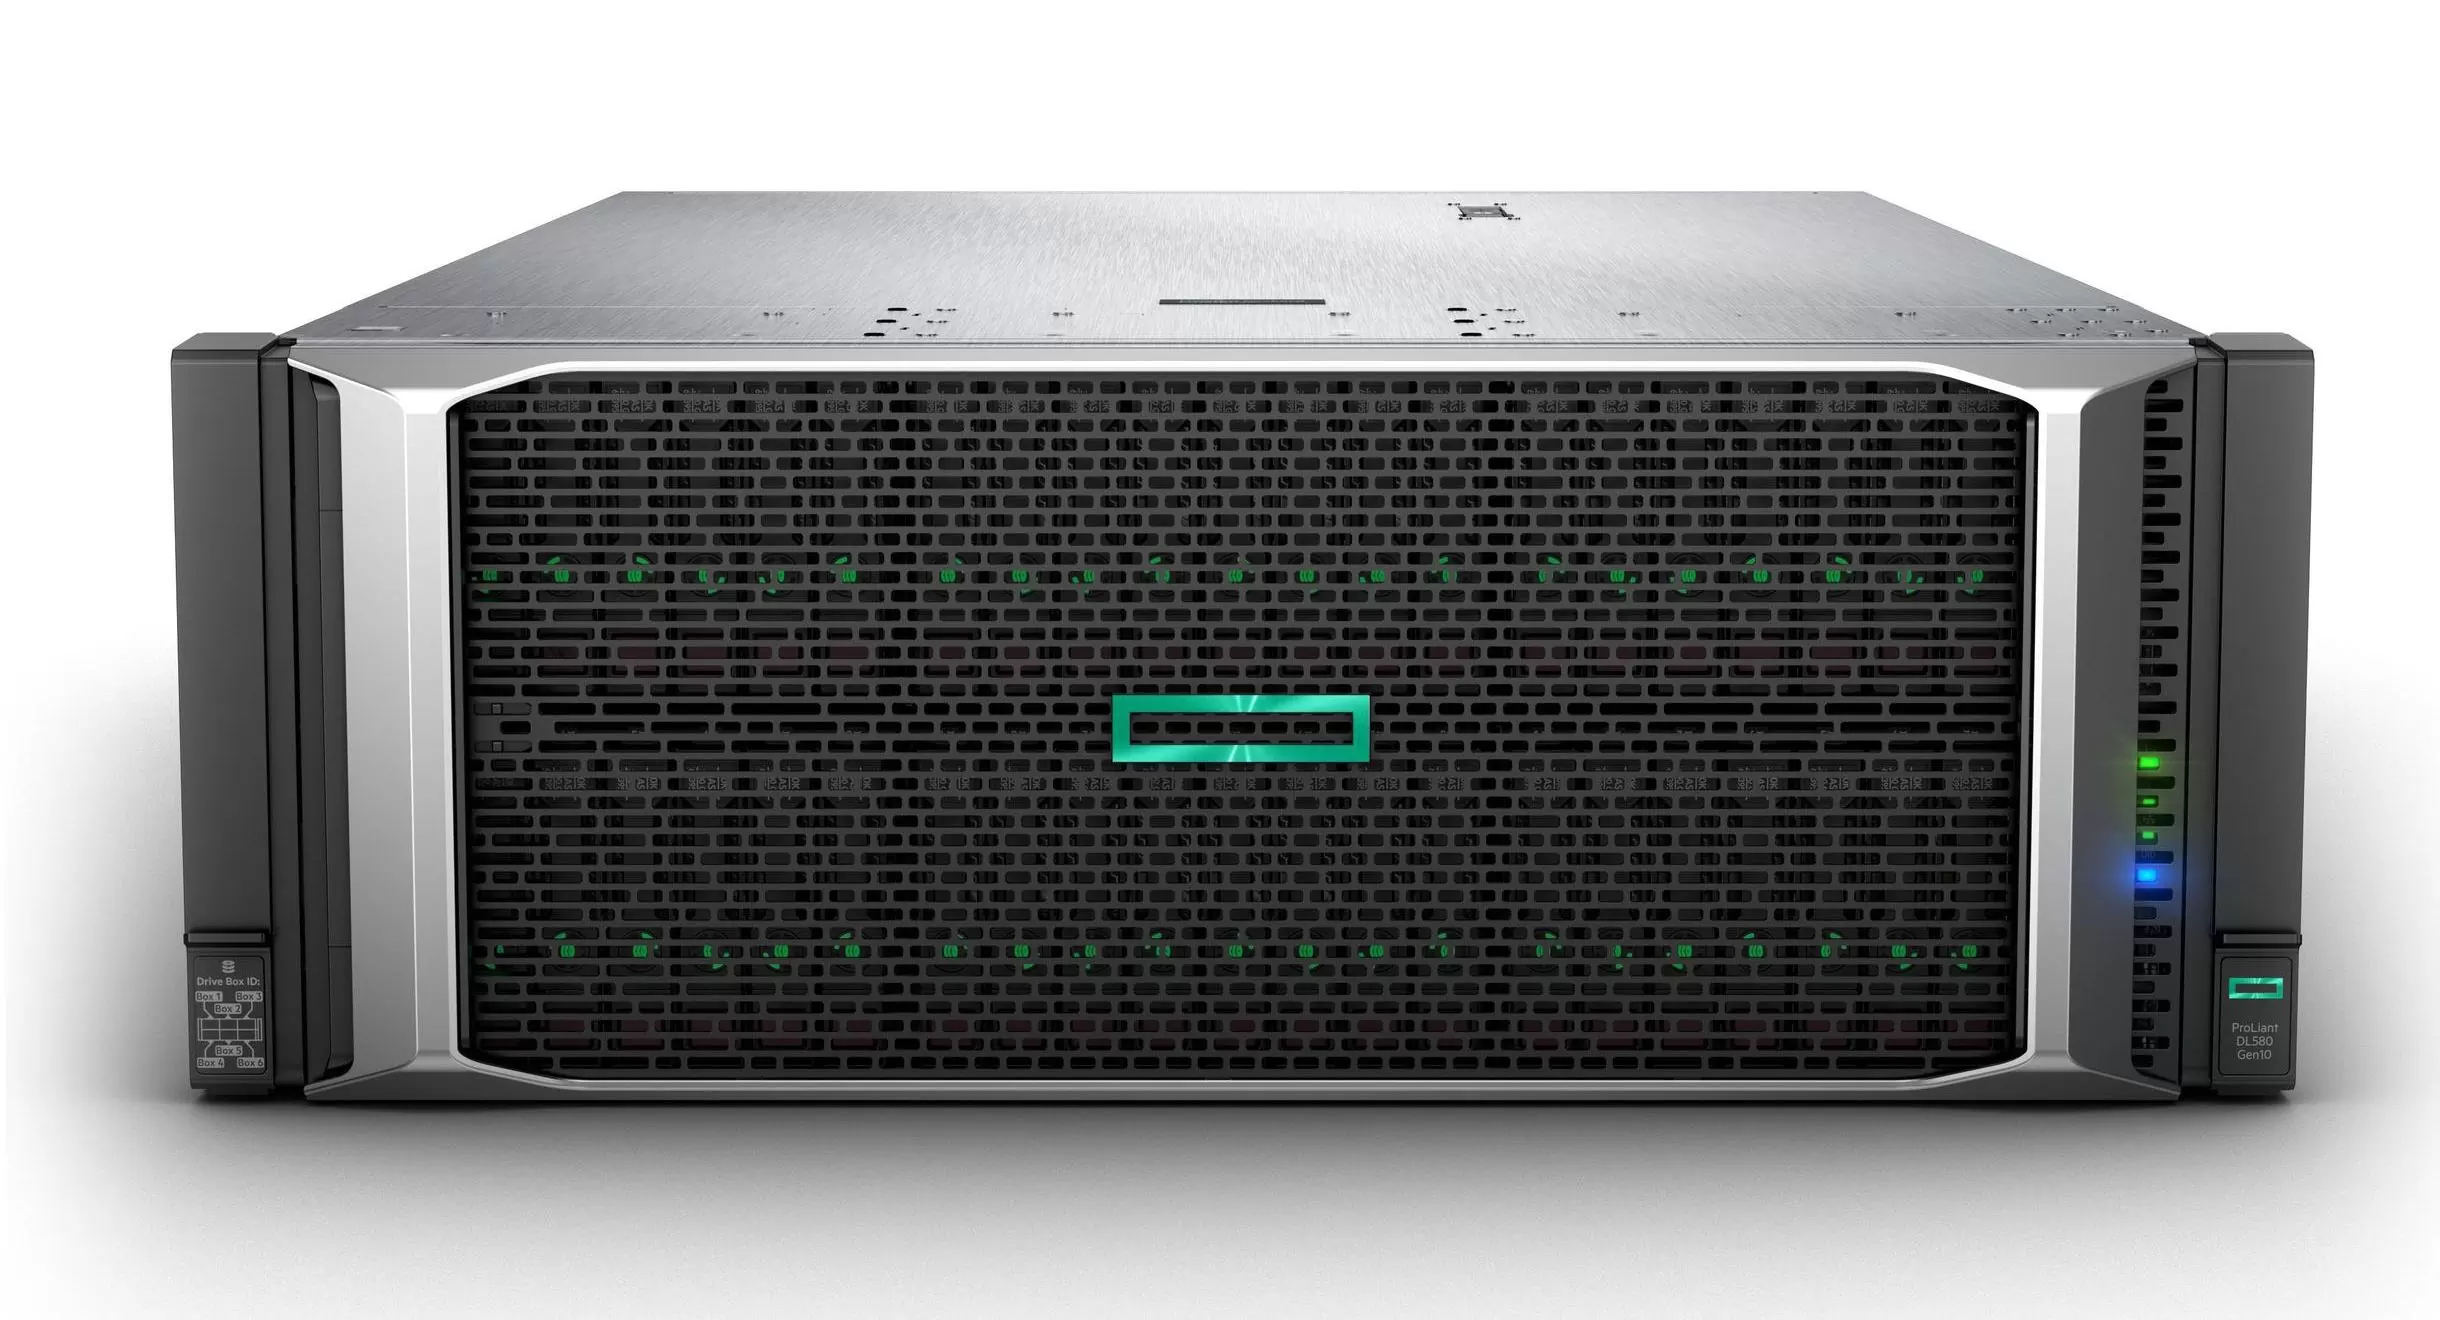 This powerful business server is built for resource intensive applications, design, and rendering